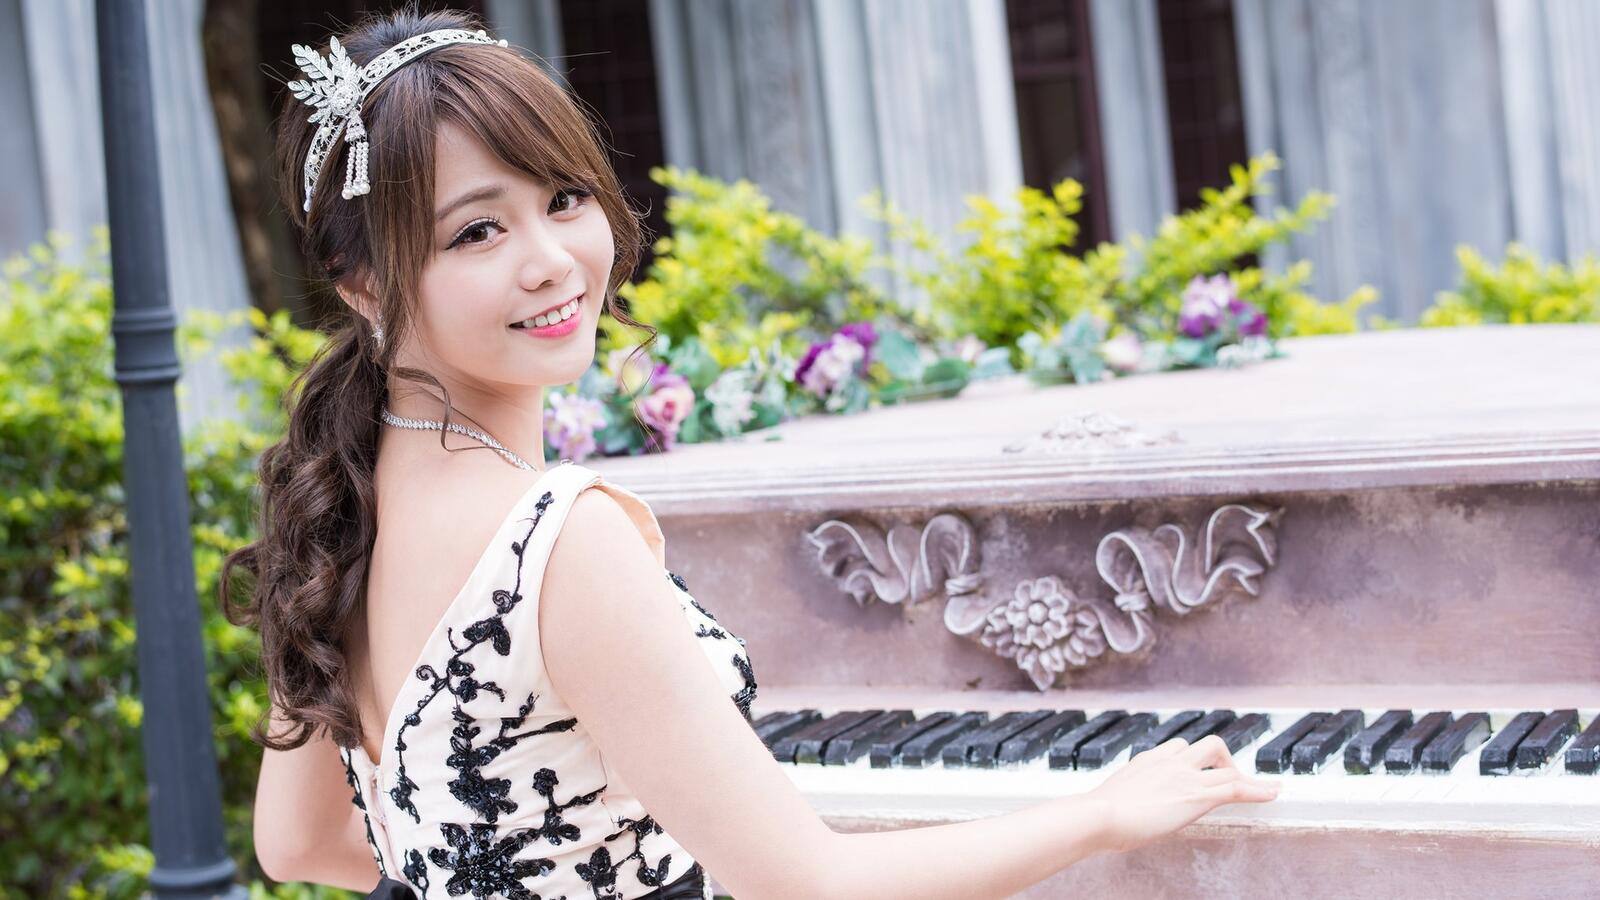 Wallpapers women outdoors piano asian appearance on the desktop